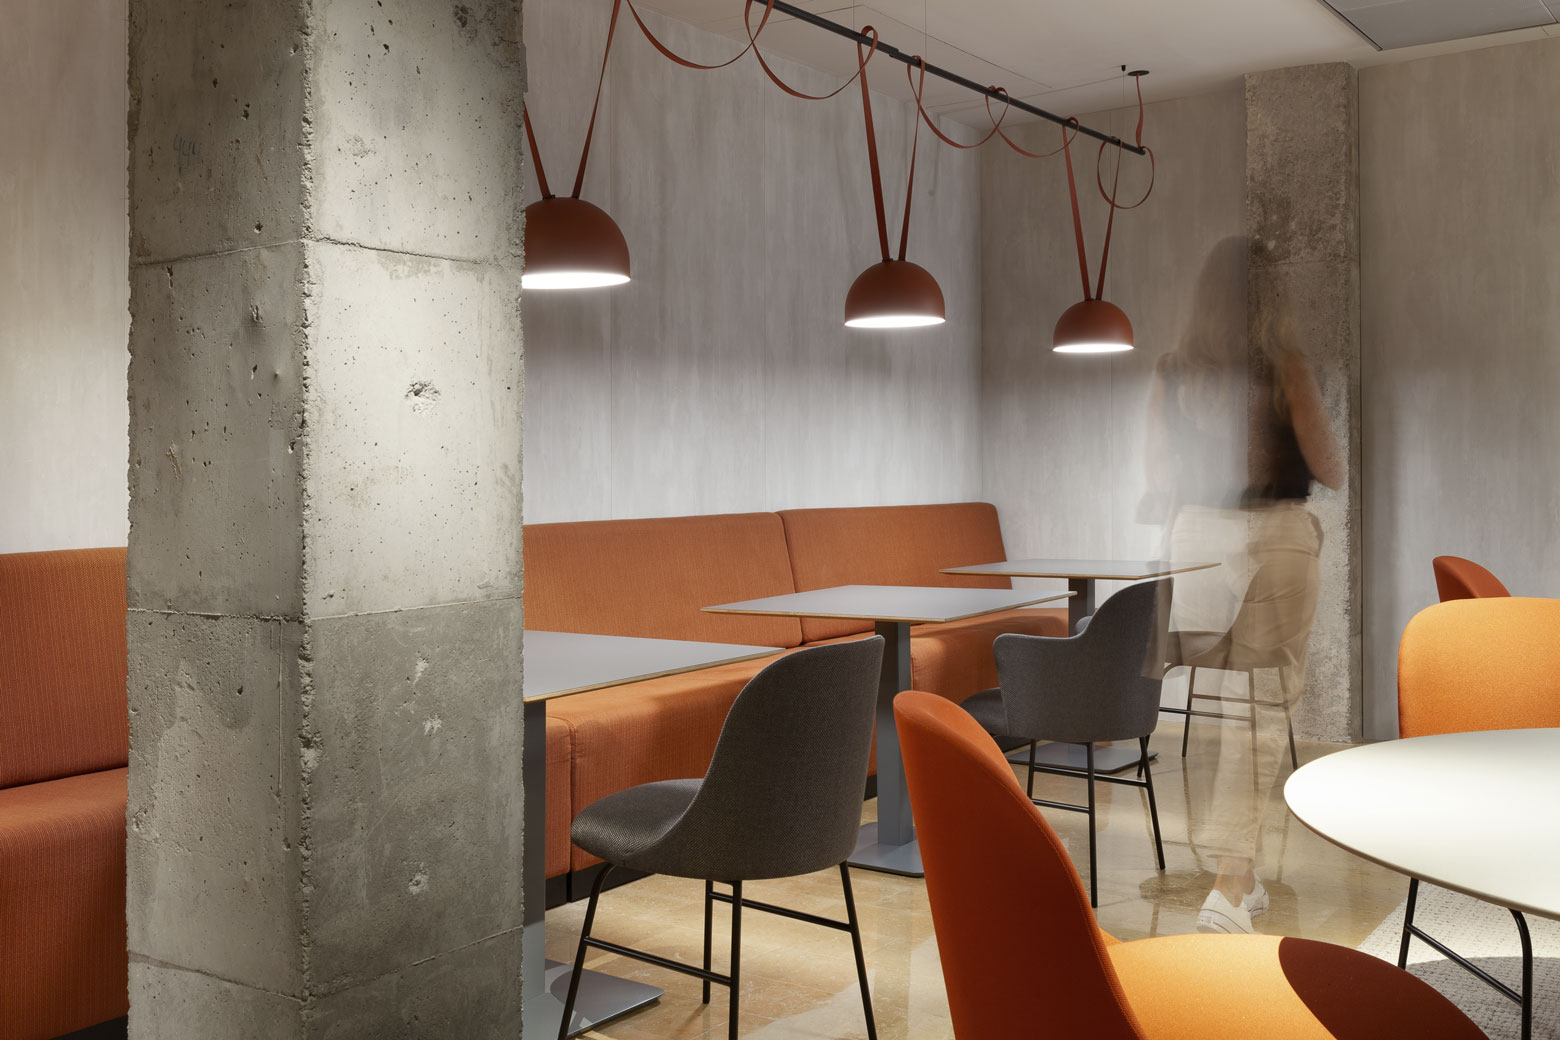 Vibia The Edit - Industrial style meets cosy lighting - Plusminus